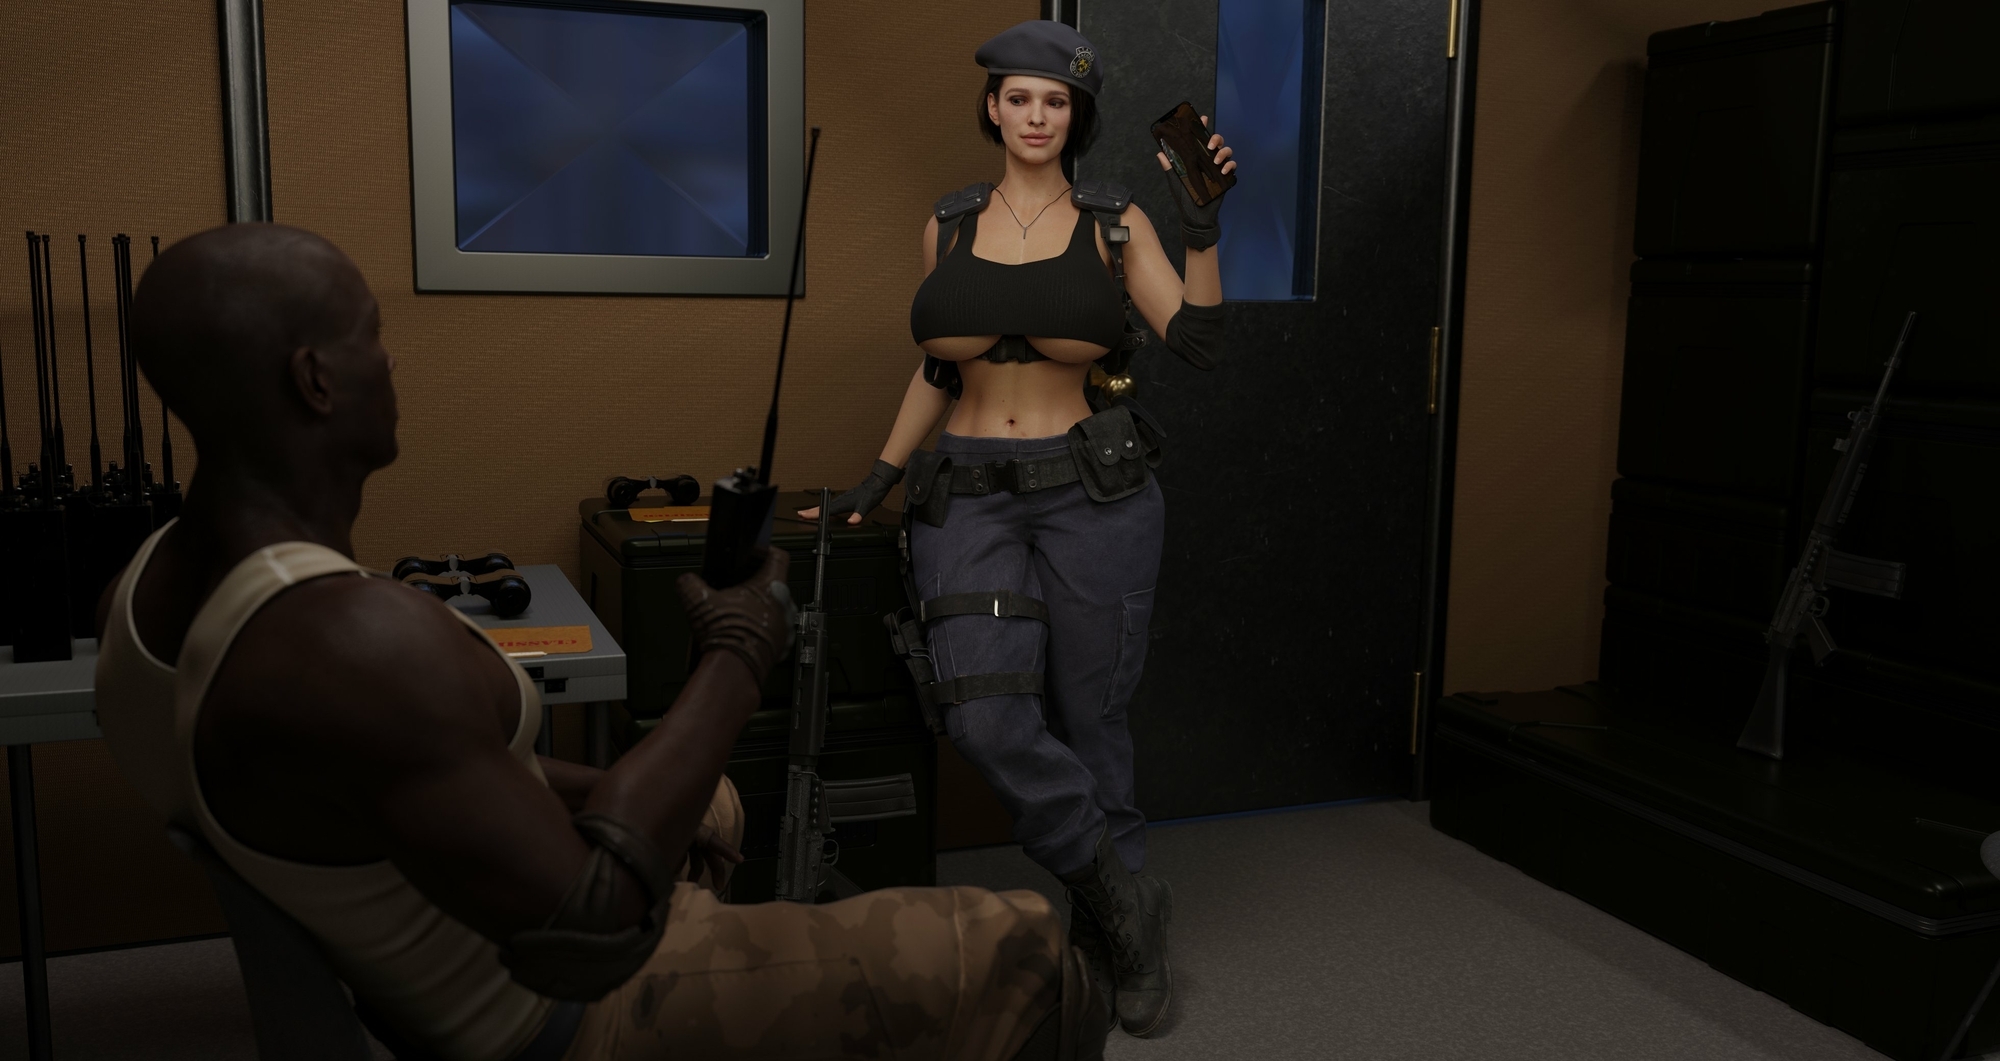 Jill confronting the sergeant for being horny online. Jill Valentine Resident Evil 3dnsfw Black Dude Big Tits Nude Black Cock Selfie Shaved Pussy Curvy Thicc Beret